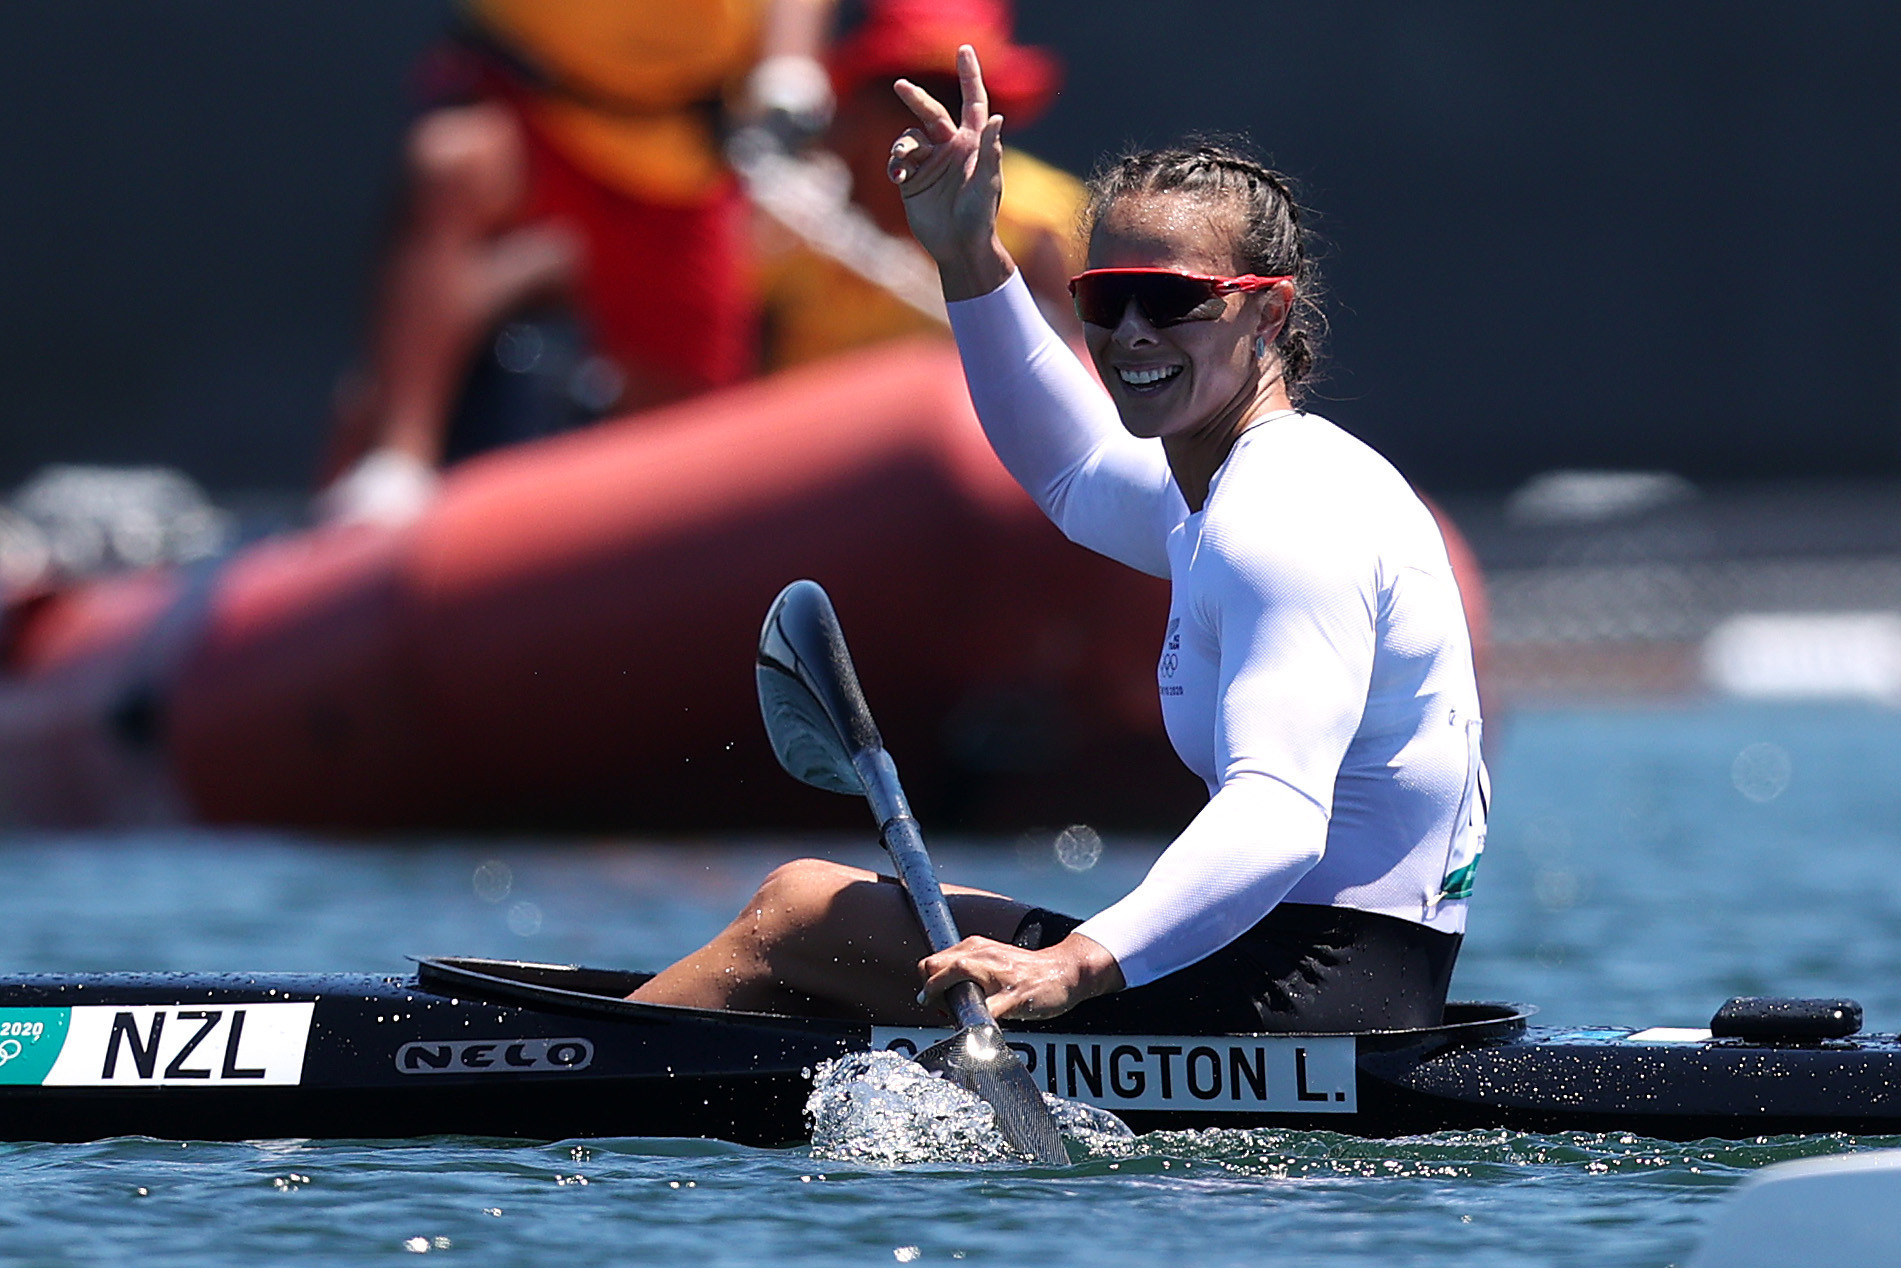 Women Olympic champions cruise to victory at ICF Canoe Sprint World Cup